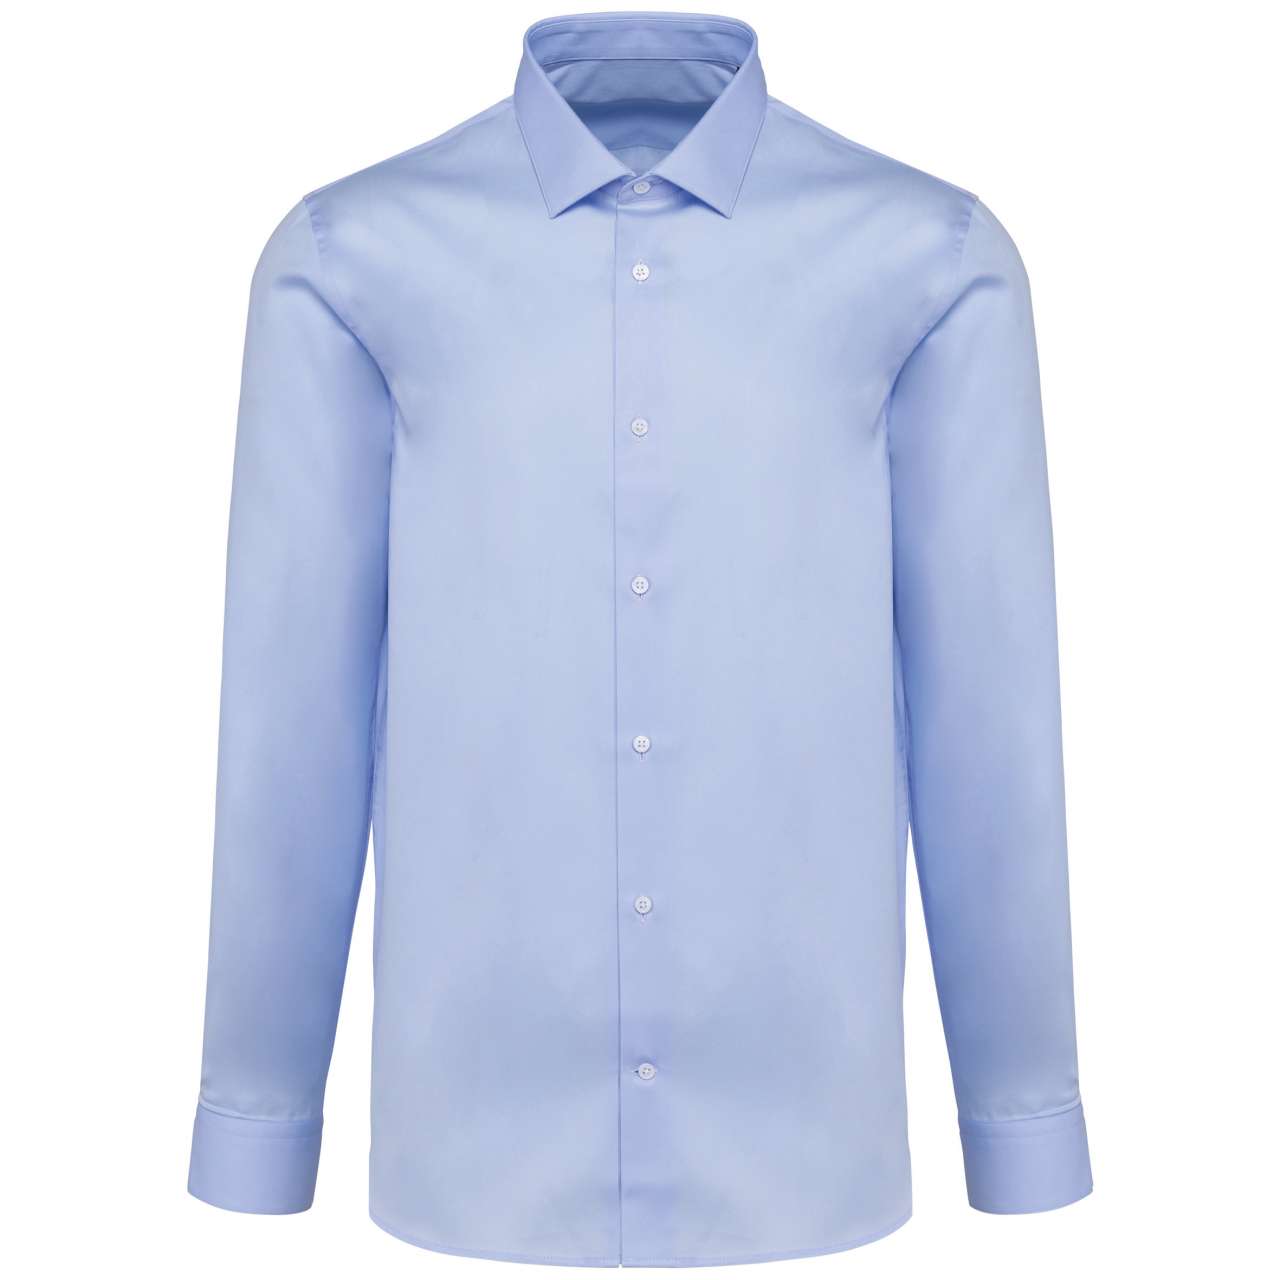 MEN'S PINPOINT OXFORD LONG-SLEEVED SHIRT